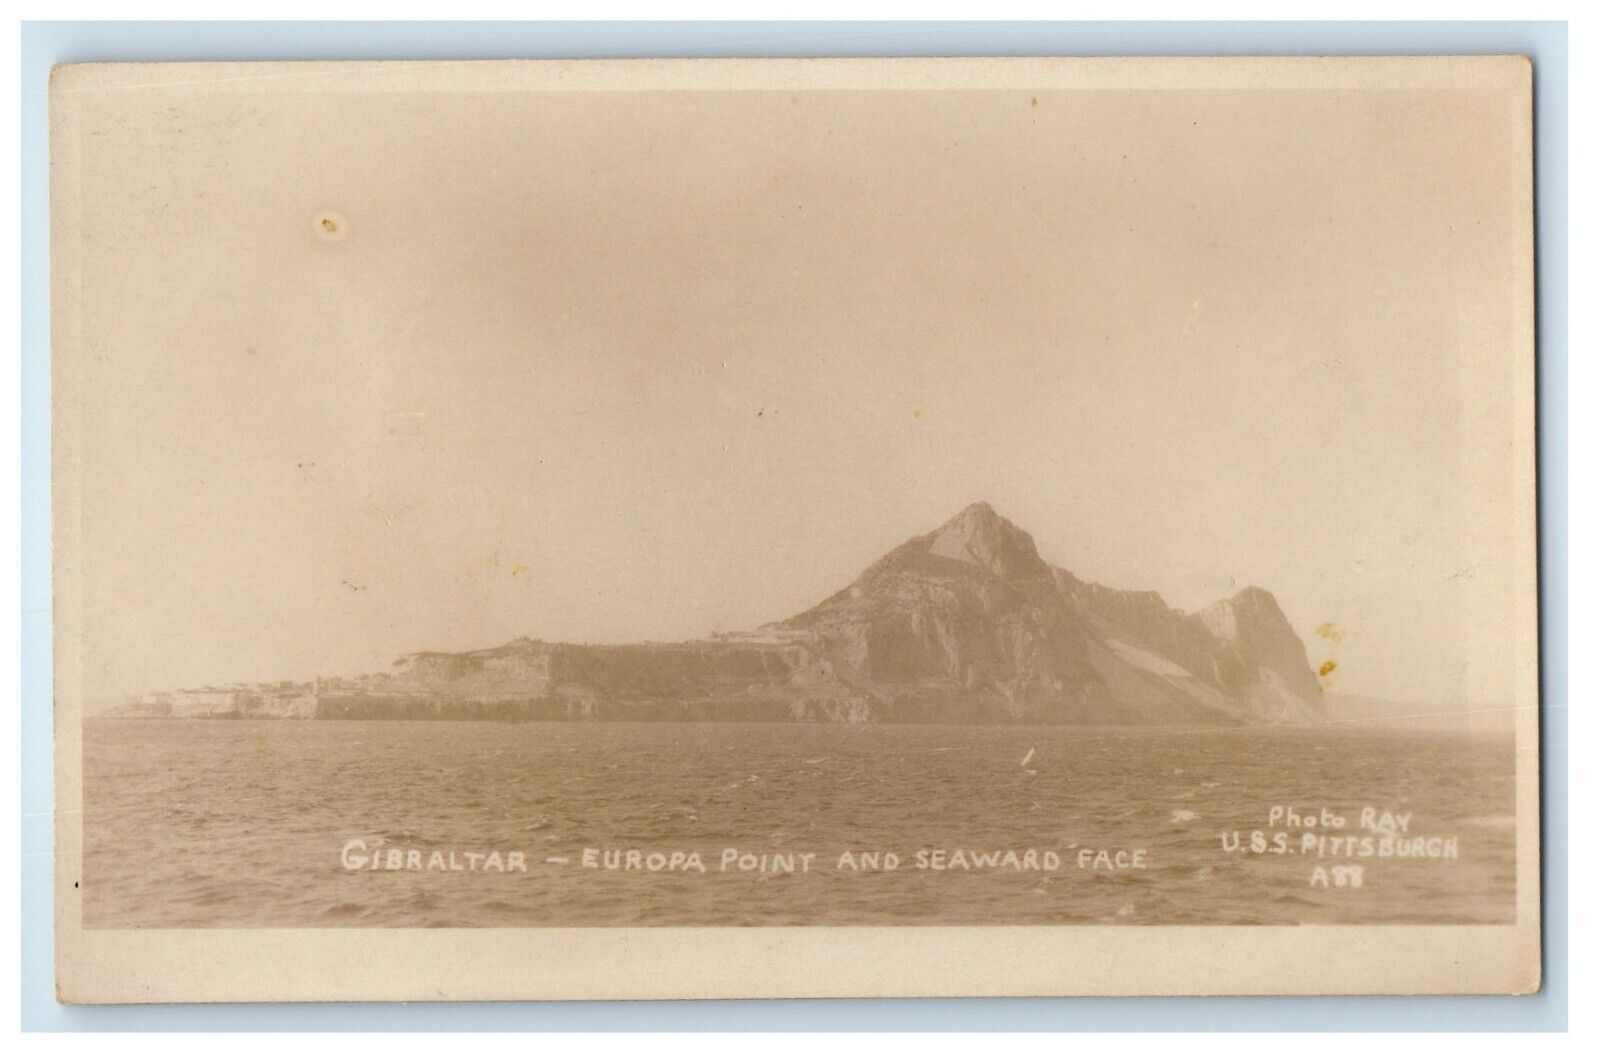 Gibraltar UK, Europa Point And Seaward Face USS Pittsburgh RPPC Photo Postcard